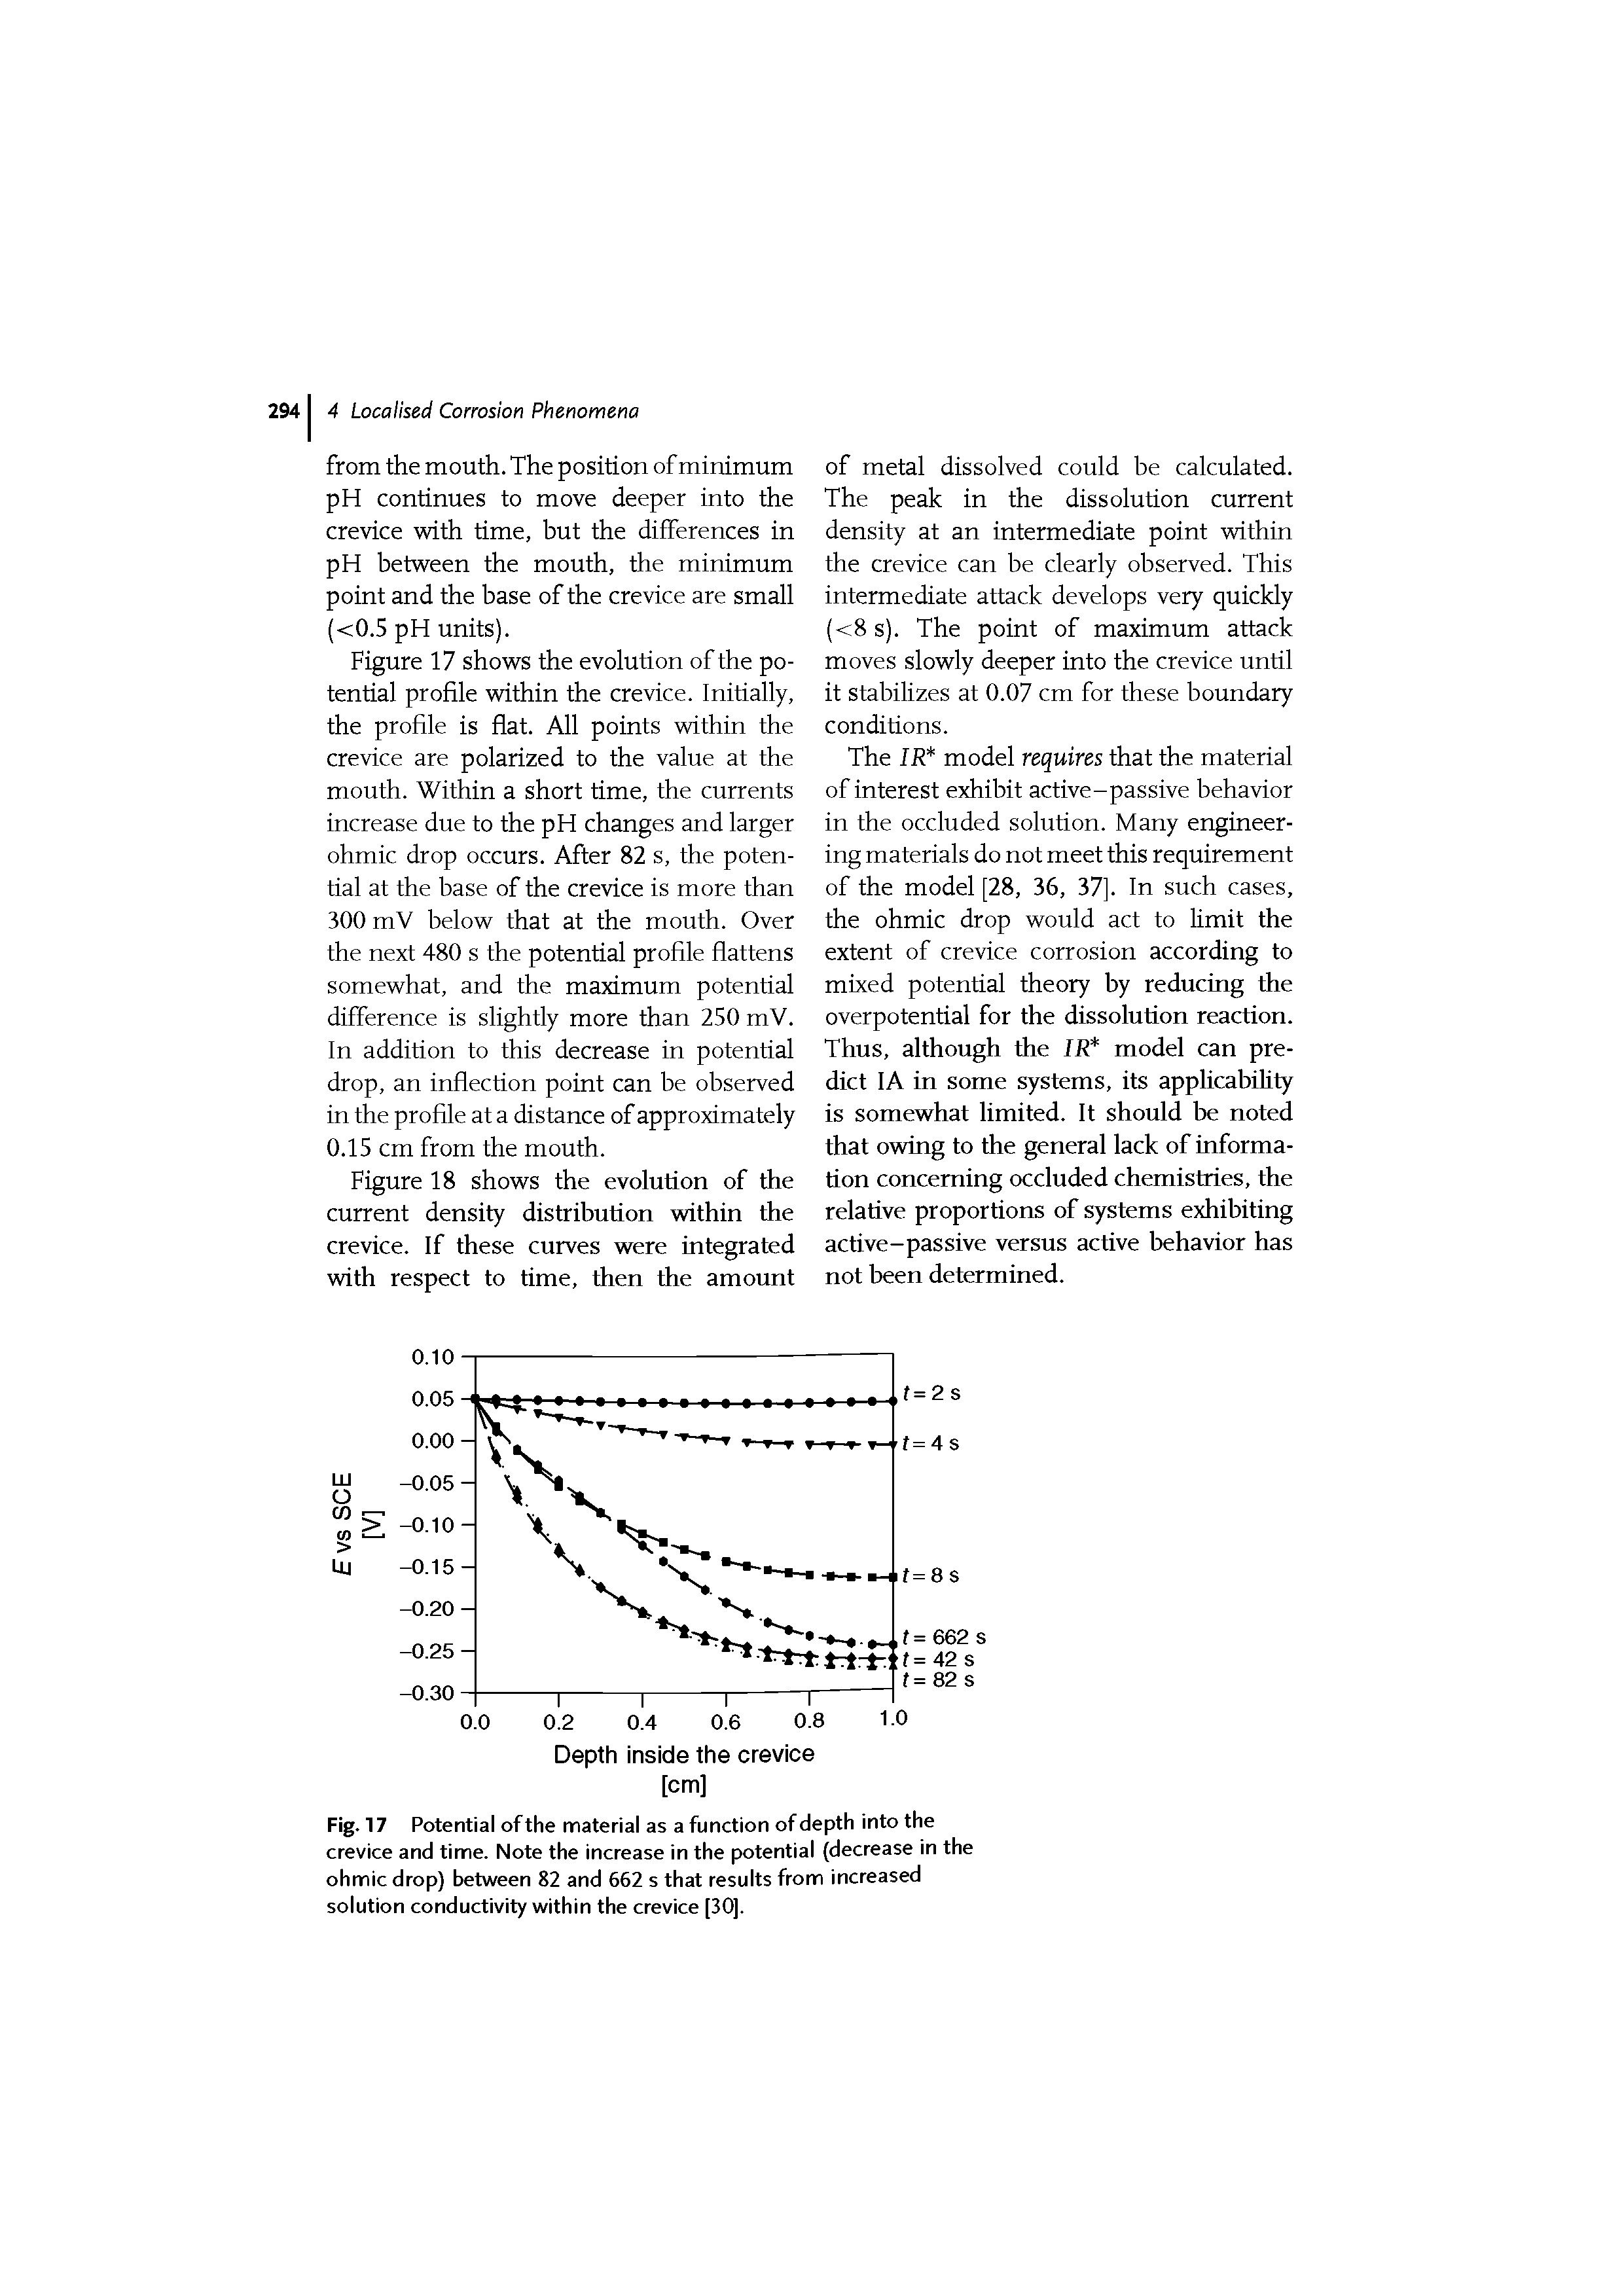 Fig. 17 Potential of the material as a function of depth into the crevice and time. Note the increase in the potential (decrease in the ohmic drop) between 82 and 662 s that results from increased solution conductivity within the crevice [30].